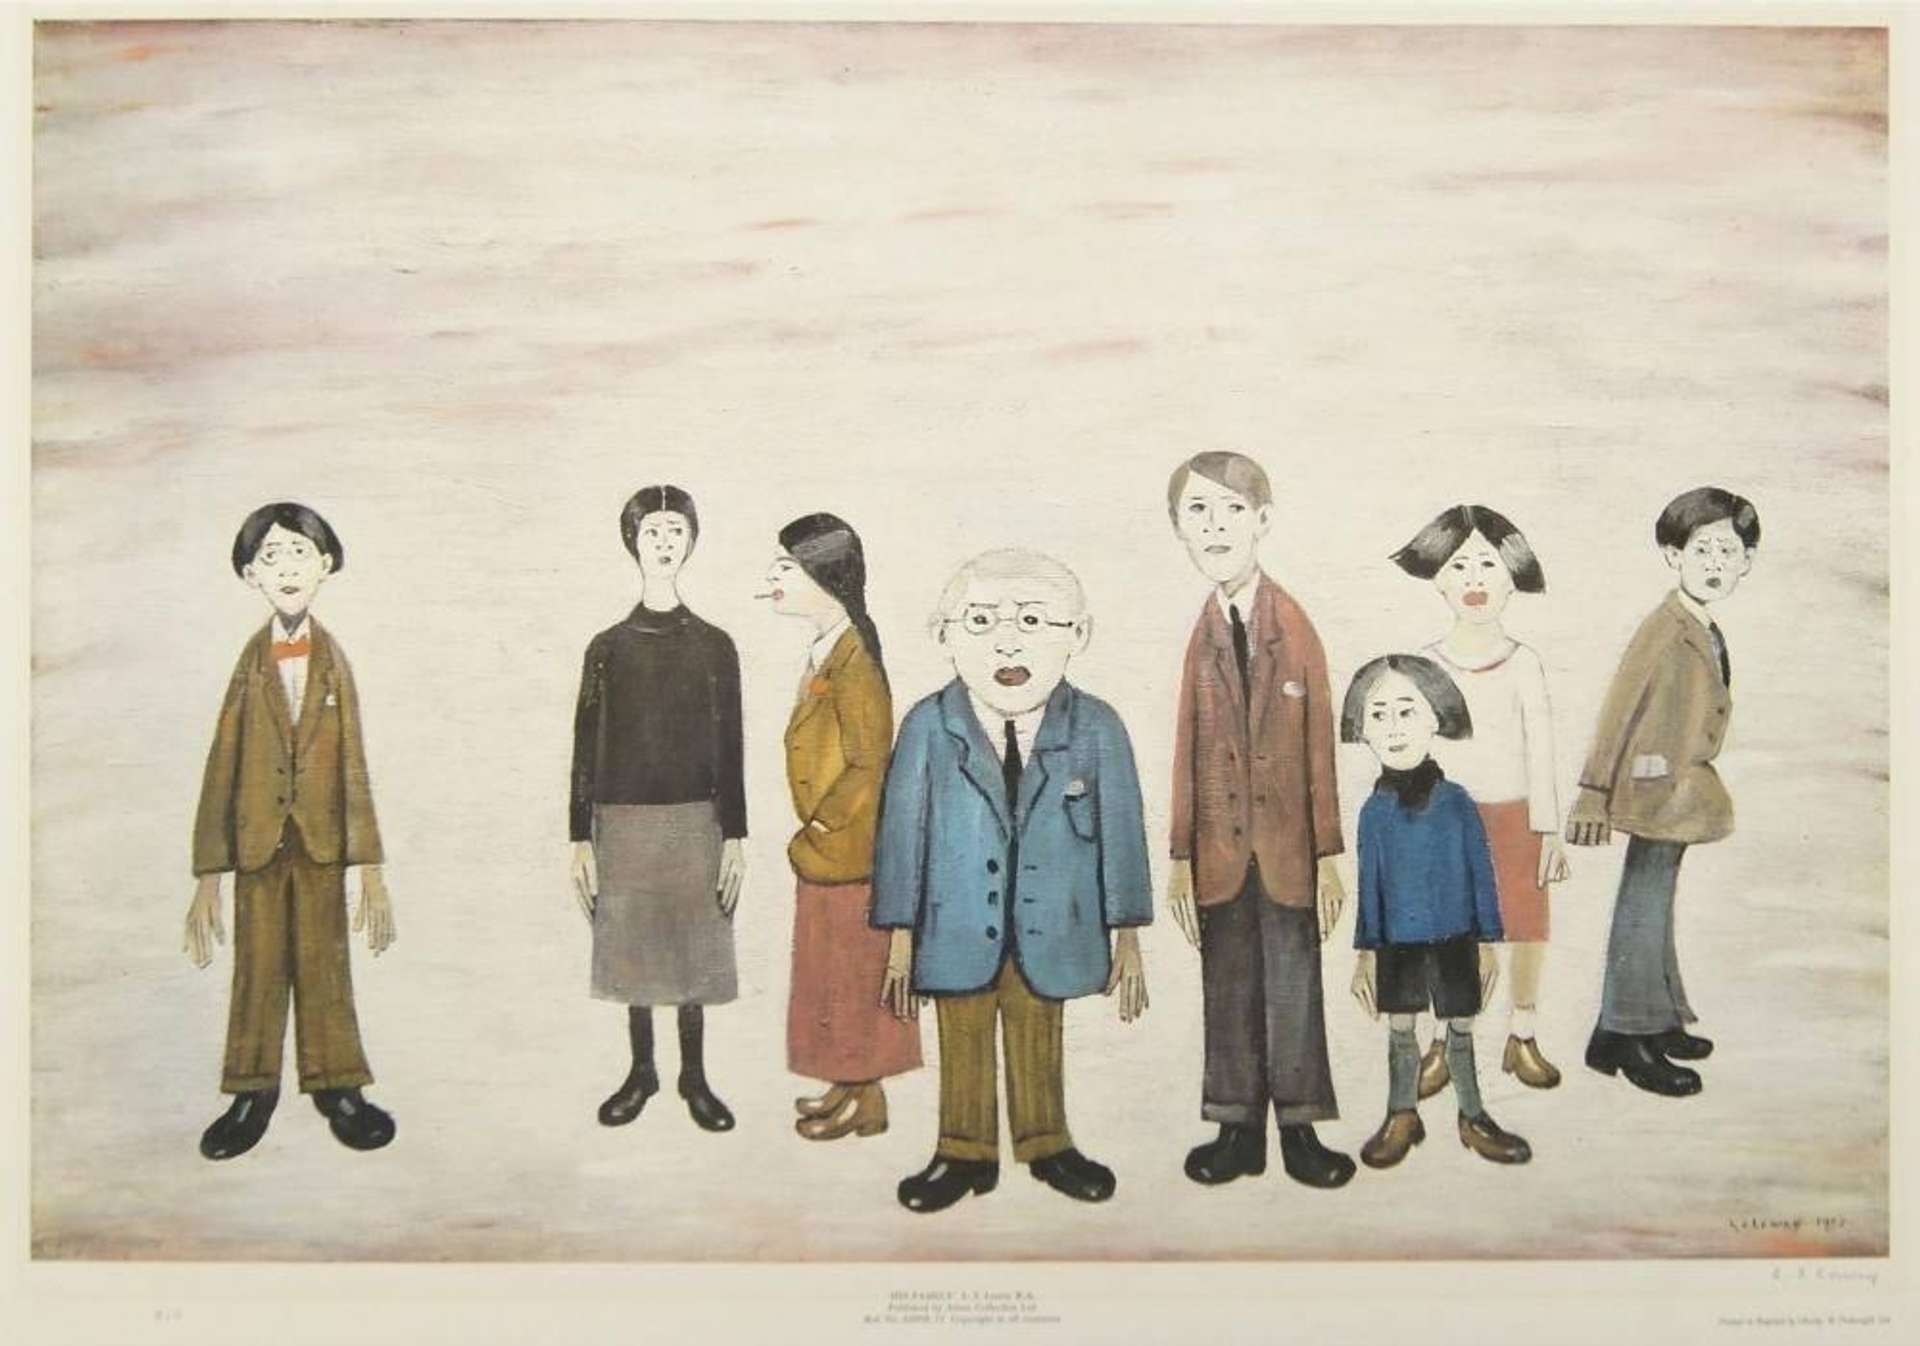 In this print by L.S. Lowry, a group of people are shown very smartly dressed against a white background. Most of them are looking directly at the viewer, and Lowry himself stands at the centre of the composition.